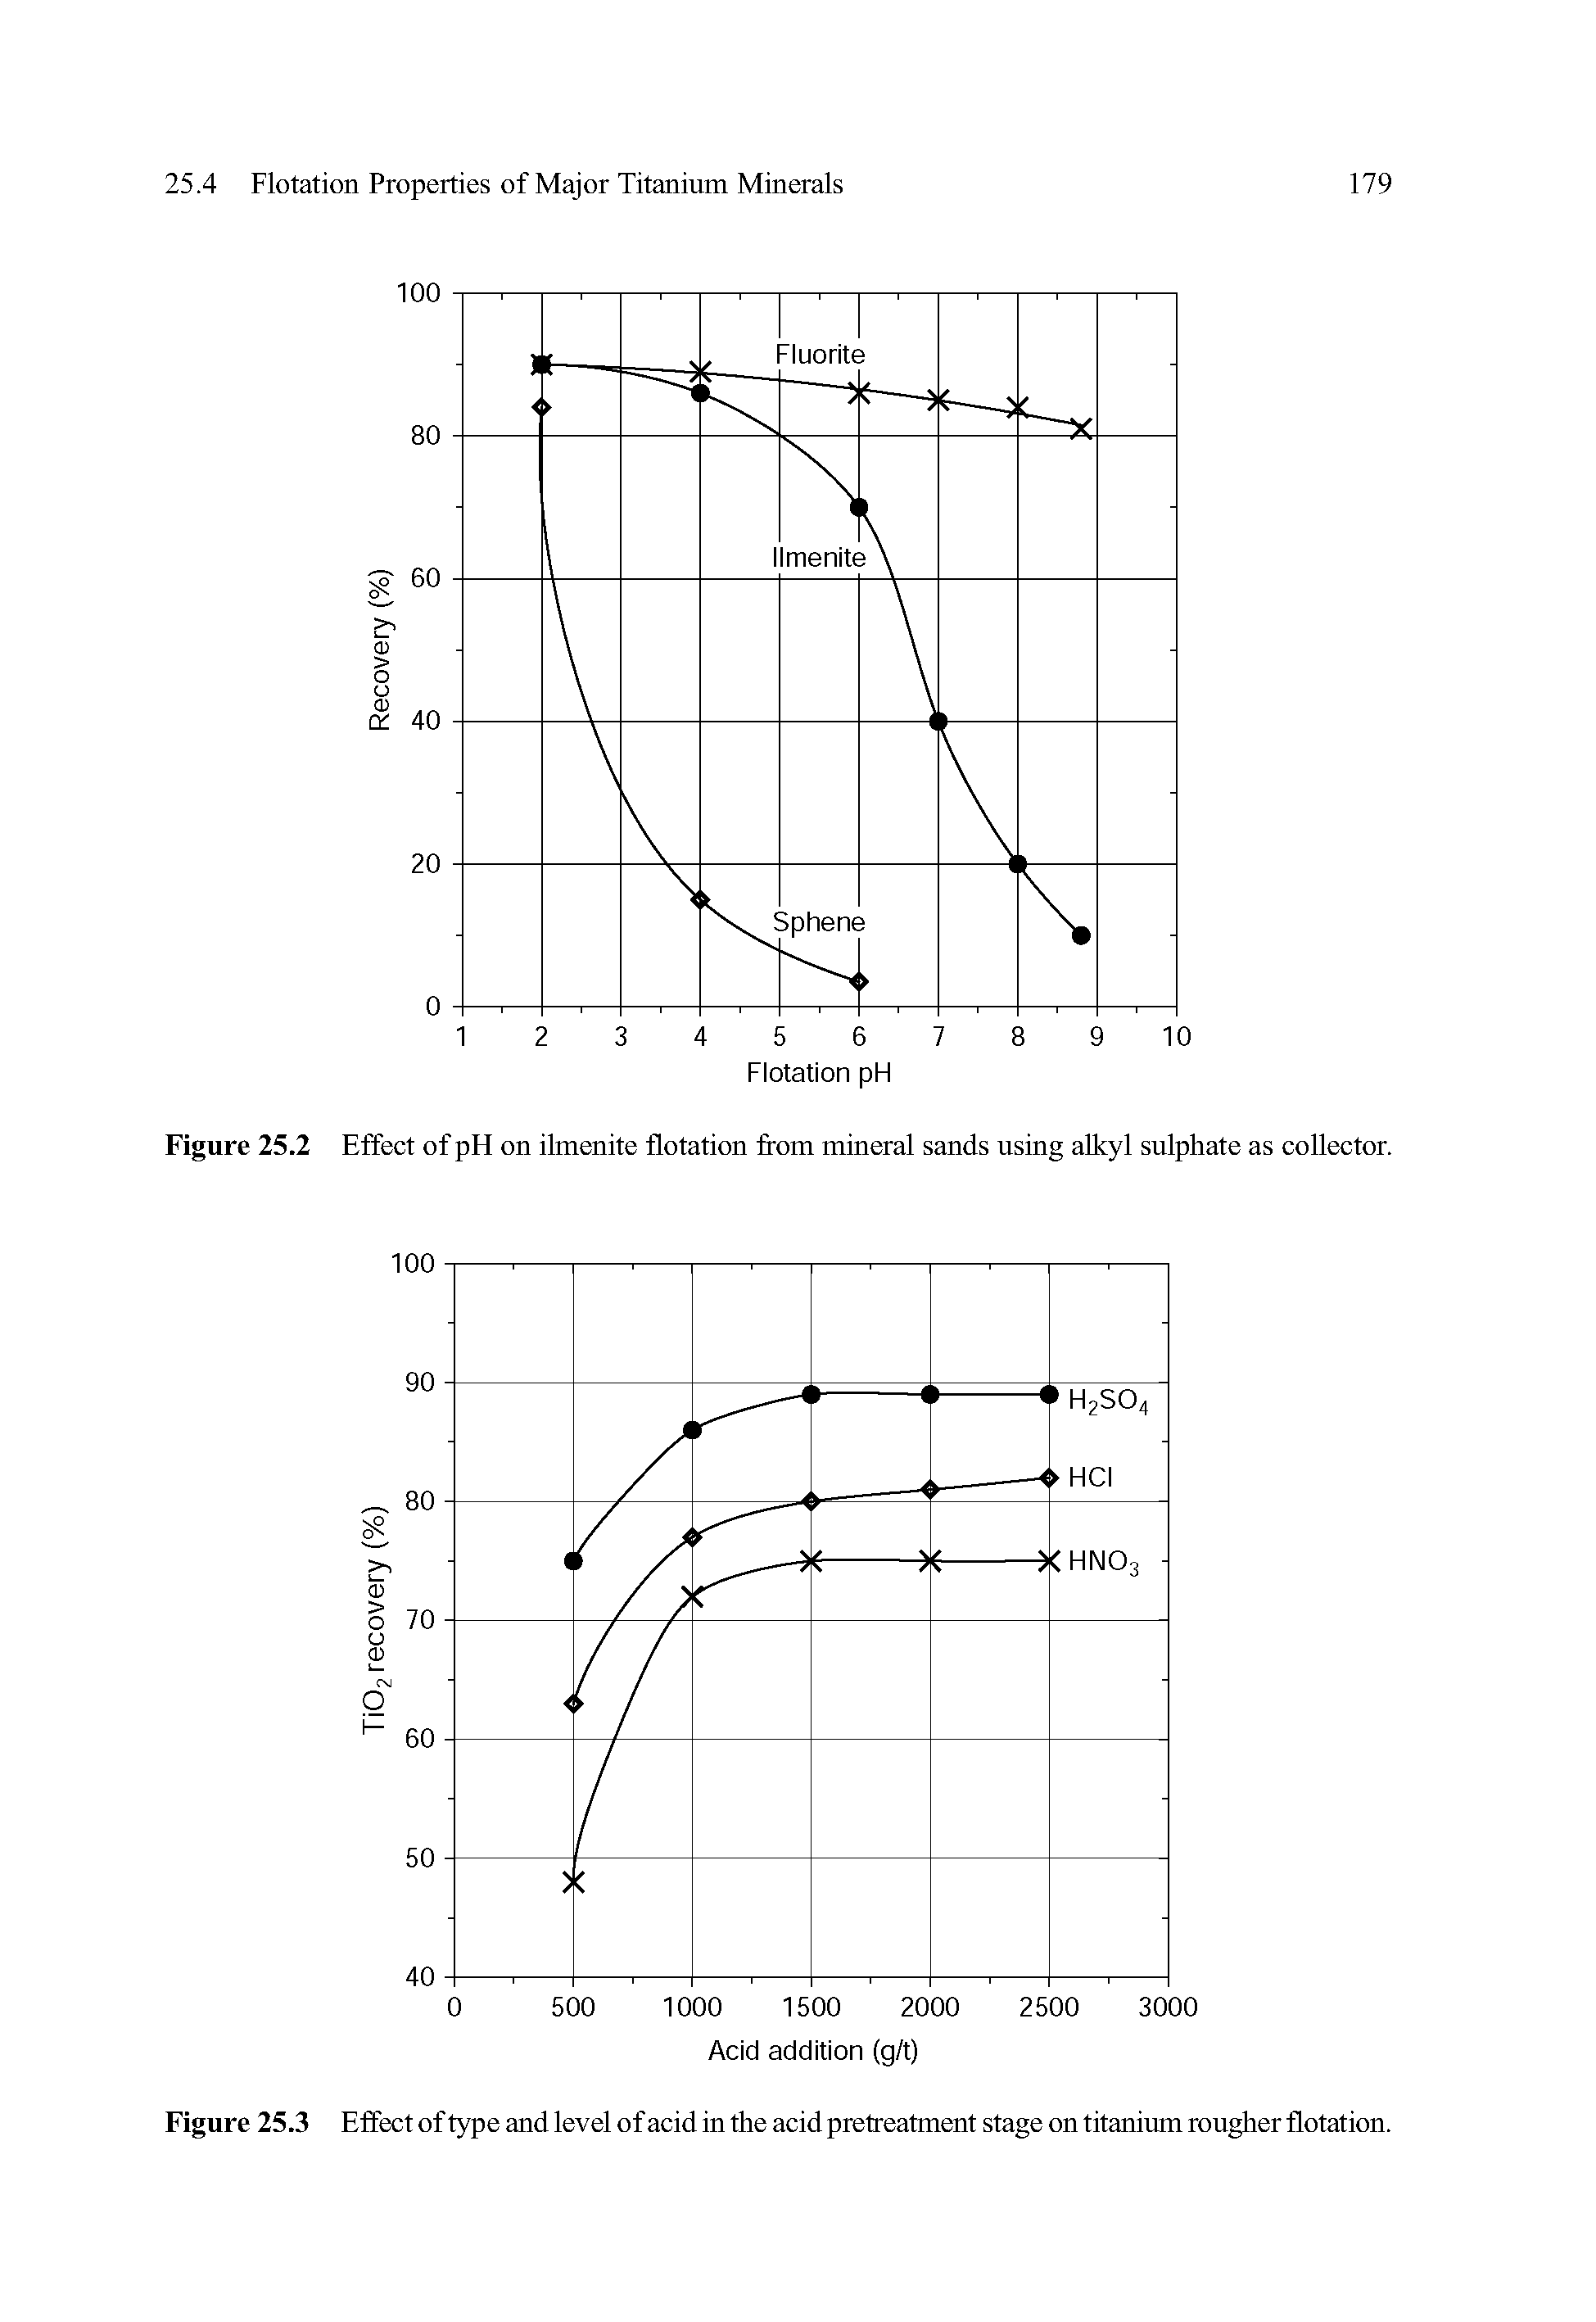 Figure 25.2 Effect of pH on ilmenite flotation from mineral sands using alkyl sulphate as collector.